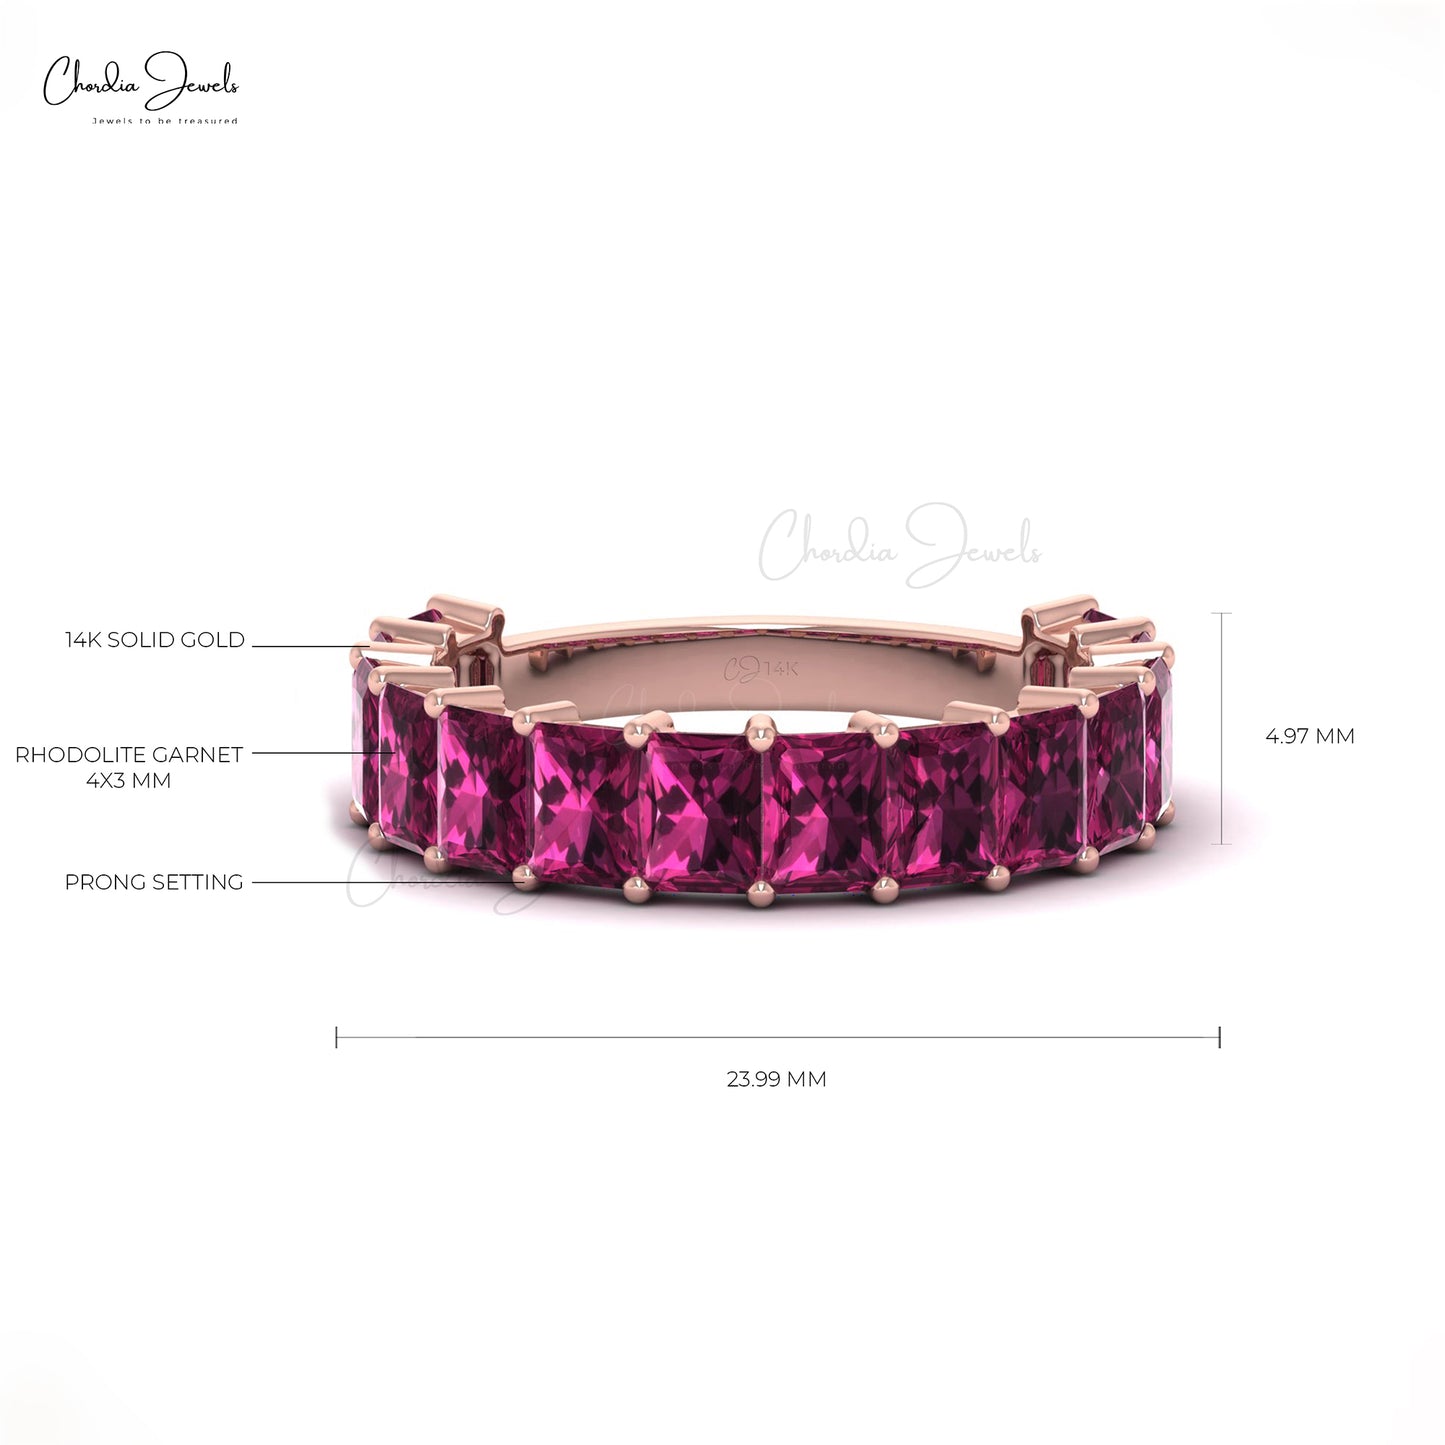 Load image into Gallery viewer, Natural Rhodolite Garnet Half Eternity Band, 3.36 Carats Gemstone Band For Women in 14k Solid Gold
